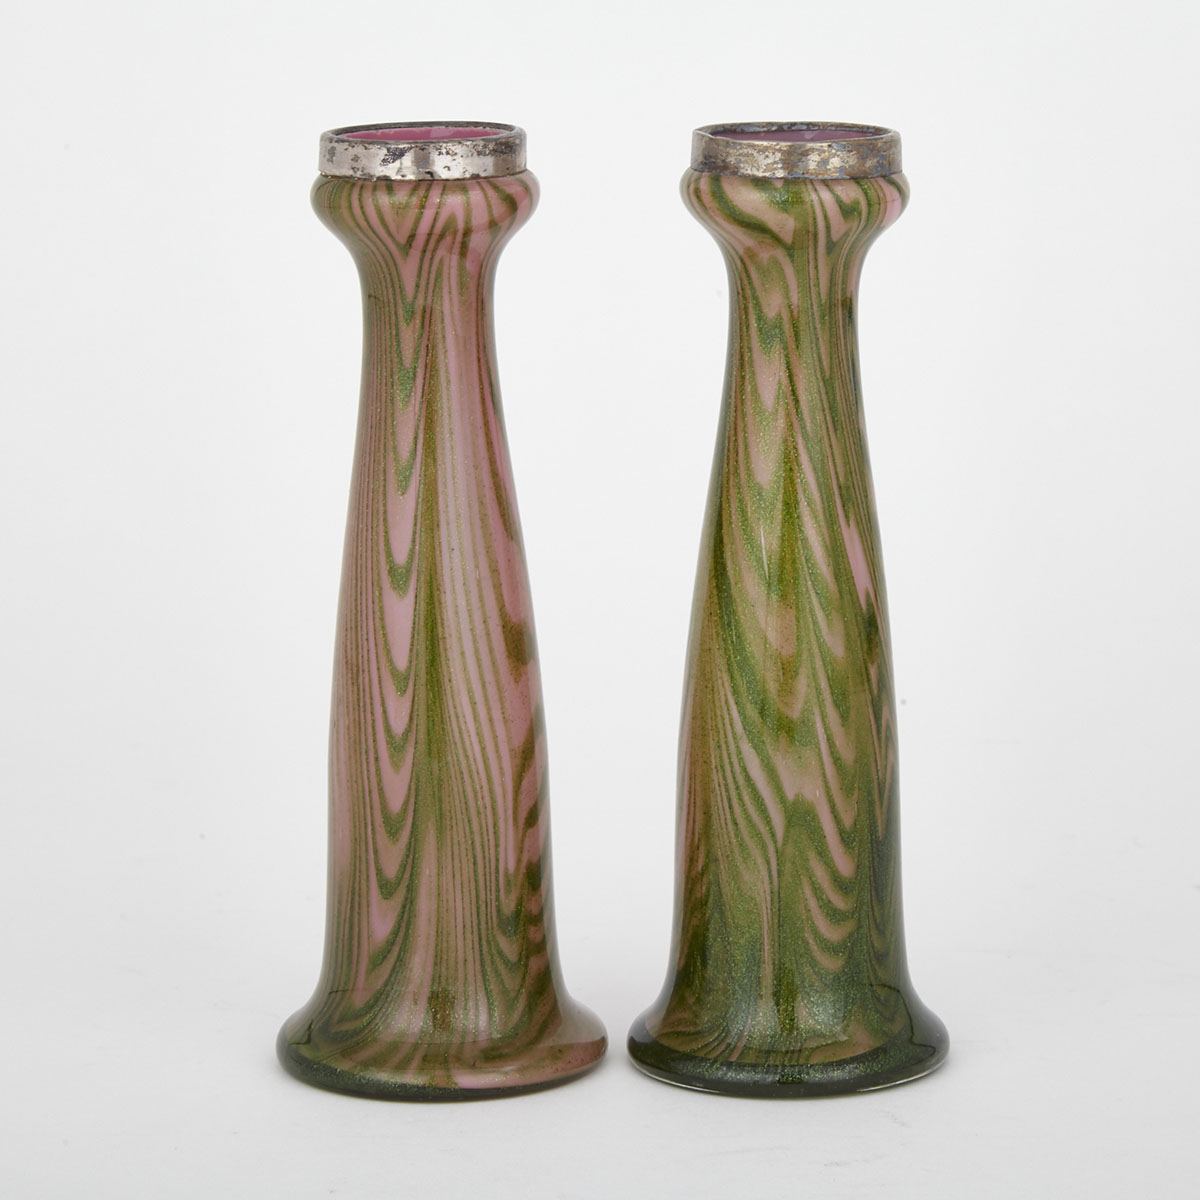 Pair of English Silver Mounted Bohemian Cased Glass Vases, 1920s